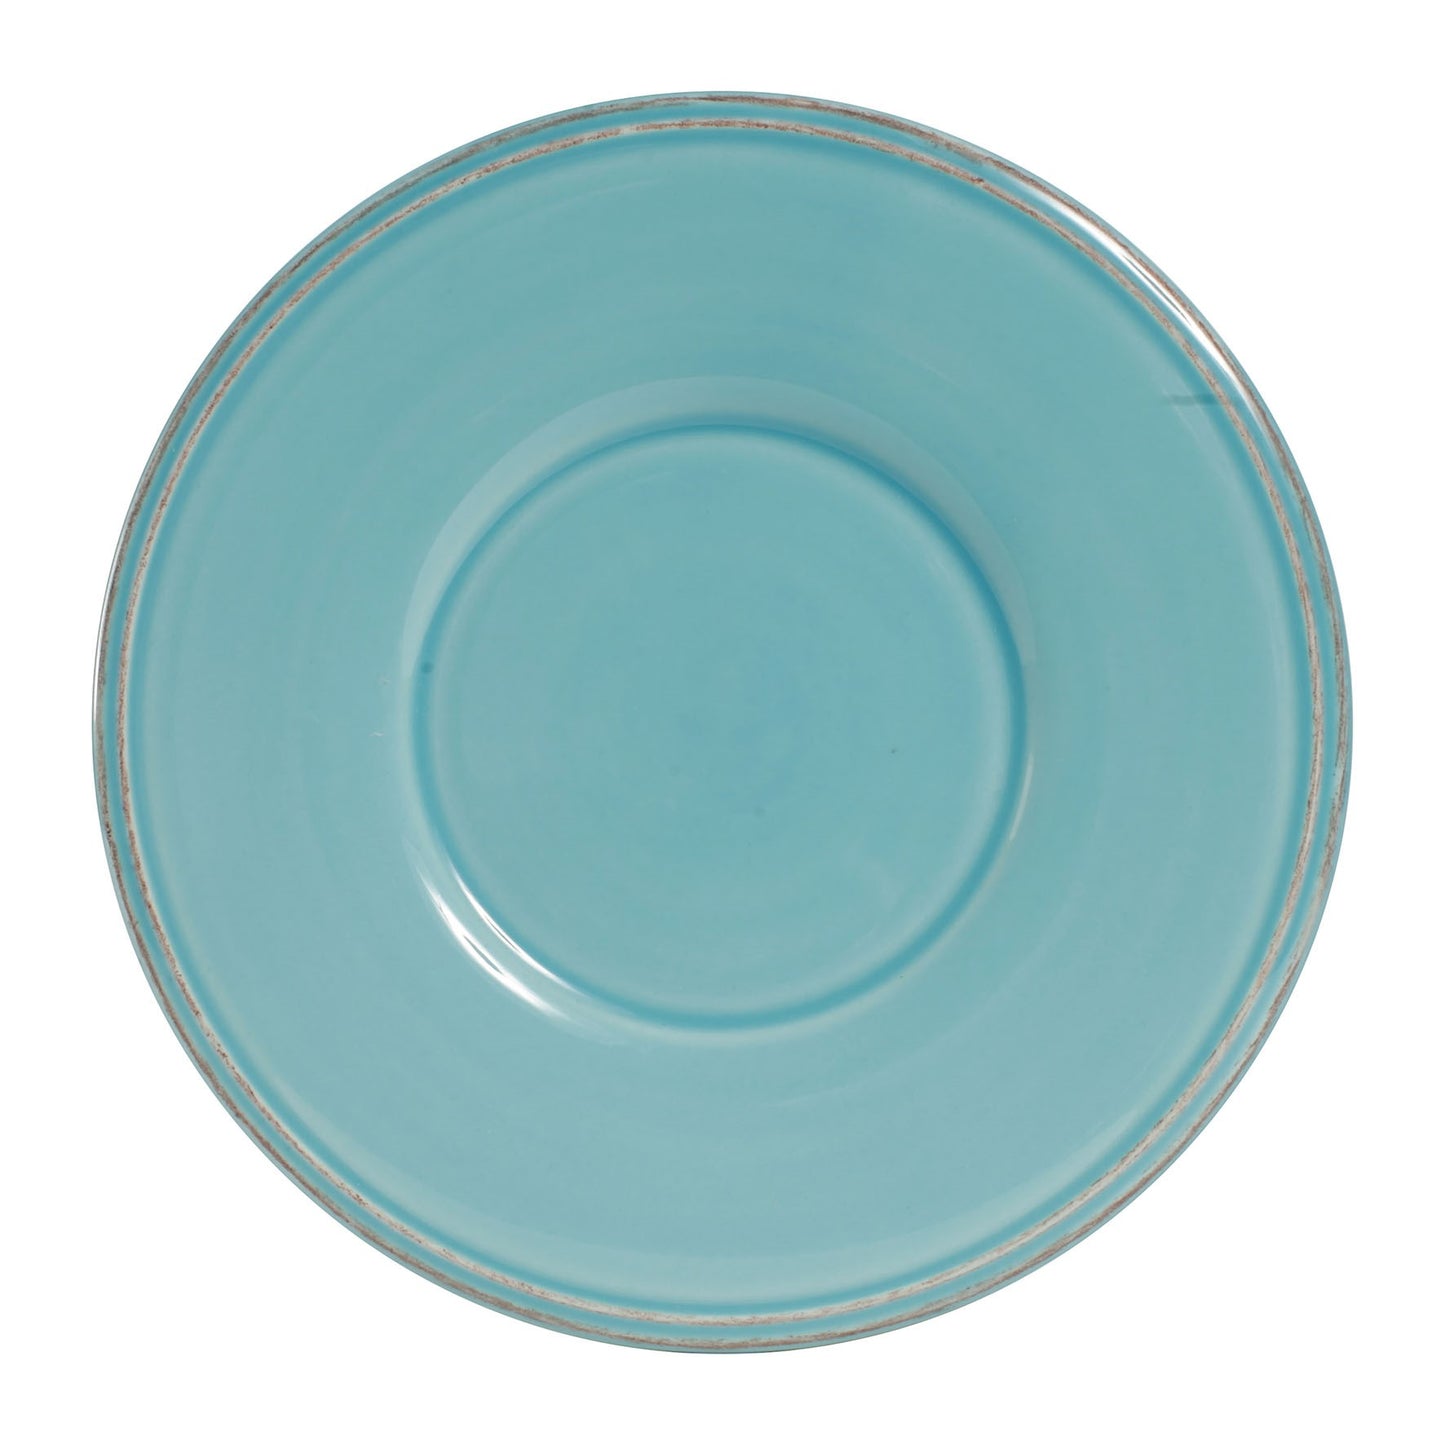 Cecilia Cup & Saucer - Turquoise